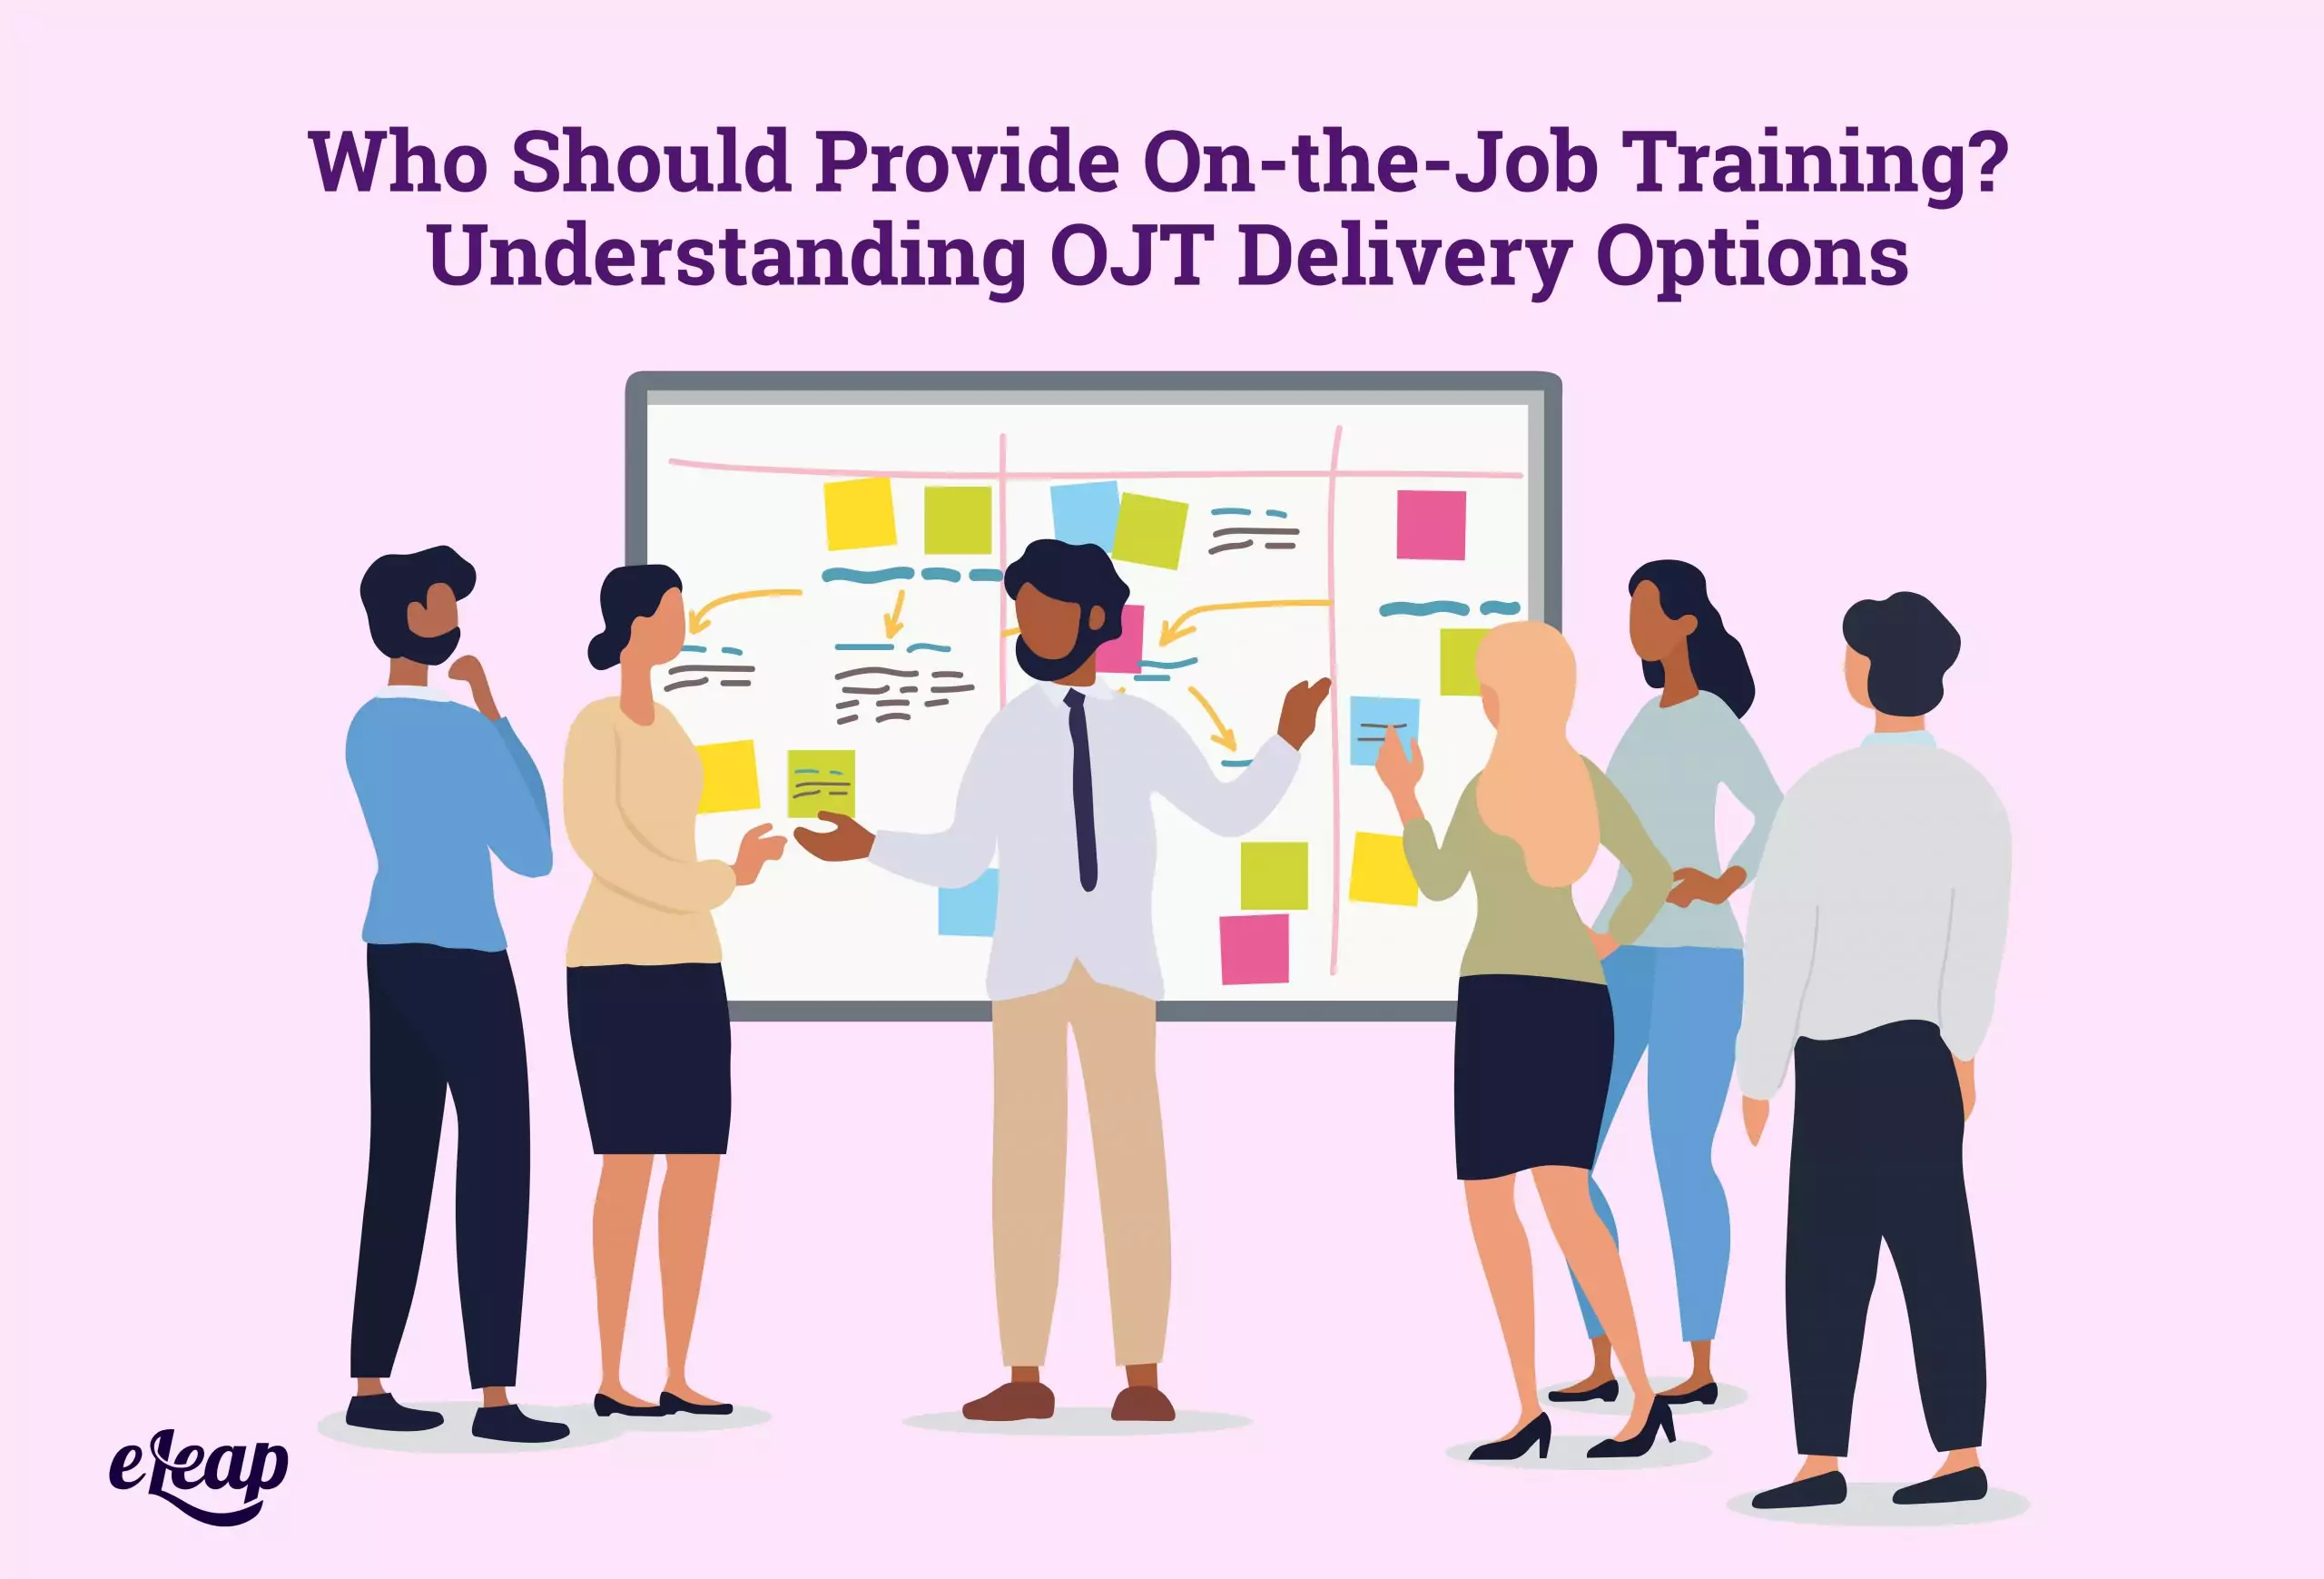 Who Should Provide On-the-Job Training? Understanding OJT Delivery Options